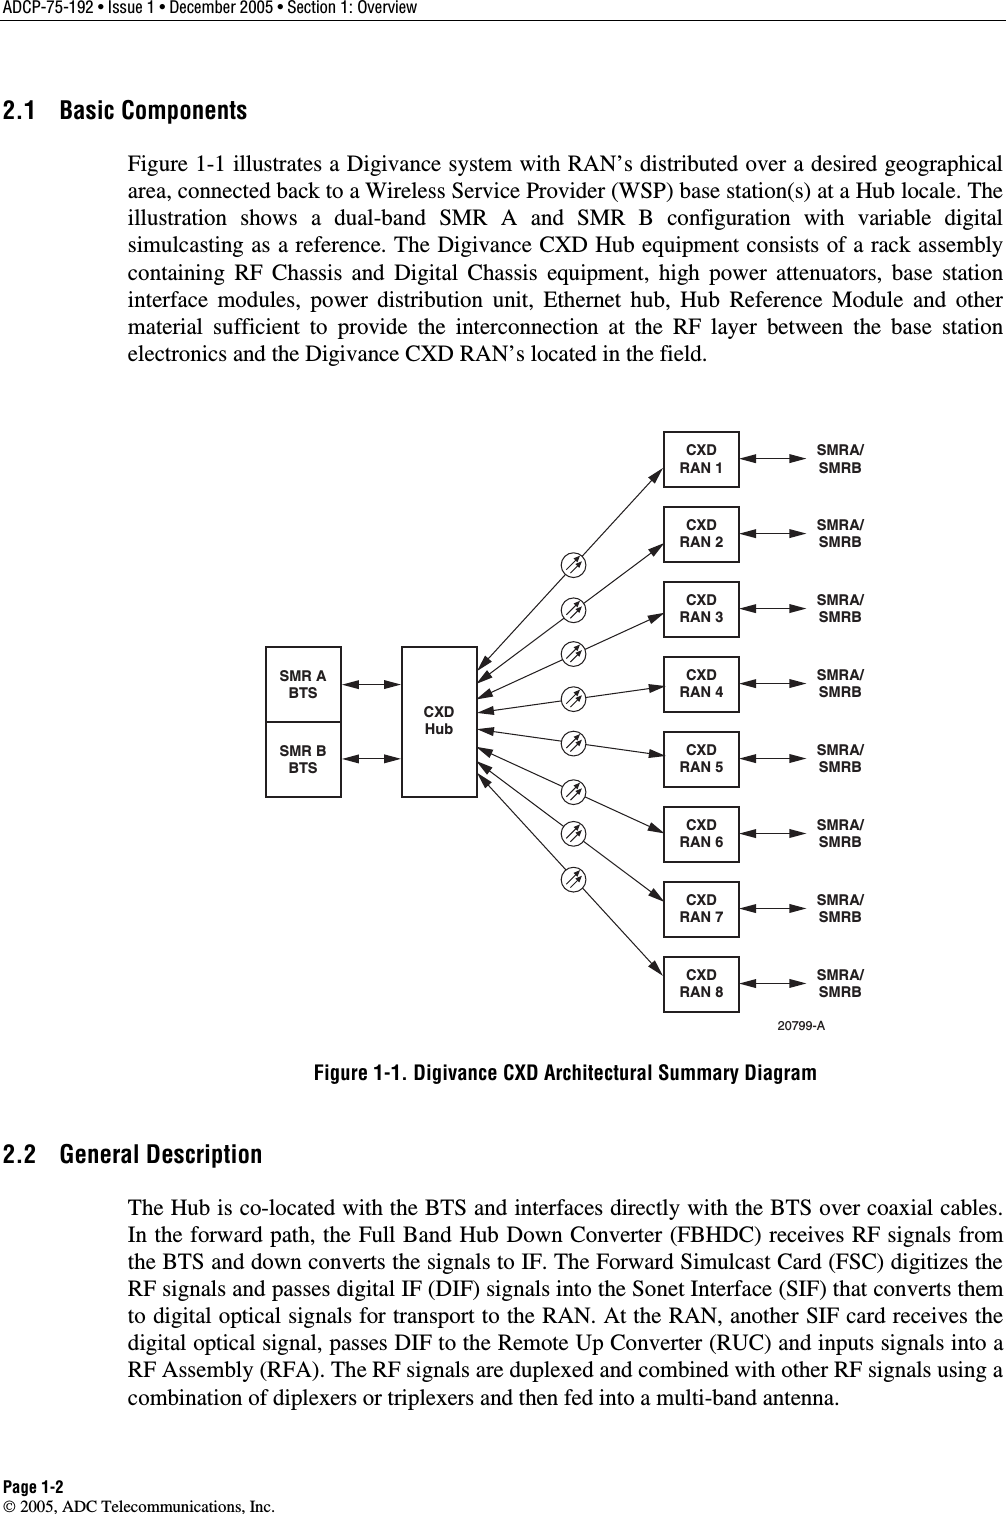 ADCP-75-192 • Issue 1 • December 2005 • Section 1: Overview Page 1-2  2005, ADC Telecommunications, Inc. 2.1 Basic Components Figure 1-1 illustrates a Digivance system with RAN’s distributed over a desired geographical area, connected back to a Wireless Service Provider (WSP) base station(s) at a Hub locale. The illustration shows a dual-band SMR A and SMR B configuration with variable digital simulcasting as a reference. The Digivance CXD Hub equipment consists of a rack assembly containing RF Chassis and Digital Chassis equipment, high power attenuators, base station interface modules, power distribution unit, Ethernet hub, Hub Reference Module and other material sufficient to provide the interconnection at the RF layer between the base station electronics and the Digivance CXD RAN’s located in the field.  CXDRAN 1SMRA/SMRBCXDRAN 2SMRA/SMRBCXDRAN 3SMRA/SMRBCXDRAN 4SMRA/SMRBCXDRAN 5SMRA/SMRBCXDRAN 6SMRA/SMRBCXDRAN 7SMRA/SMRBCXDRAN 8SMRA/SMRBSMR ABTSCXDHubSMR BBTS20799-A Figure 1-1. Digivance CXD Architectural Summary Diagram 2.2 General Description The Hub is co-located with the BTS and interfaces directly with the BTS over coaxial cables. In the forward path, the Full Band Hub Down Converter (FBHDC) receives RF signals from the BTS and down converts the signals to IF. The Forward Simulcast Card (FSC) digitizes the RF signals and passes digital IF (DIF) signals into the Sonet Interface (SIF) that converts them to digital optical signals for transport to the RAN. At the RAN, another SIF card receives the digital optical signal, passes DIF to the Remote Up Converter (RUC) and inputs signals into a RF Assembly (RFA). The RF signals are duplexed and combined with other RF signals using a combination of diplexers or triplexers and then fed into a multi-band antenna.  